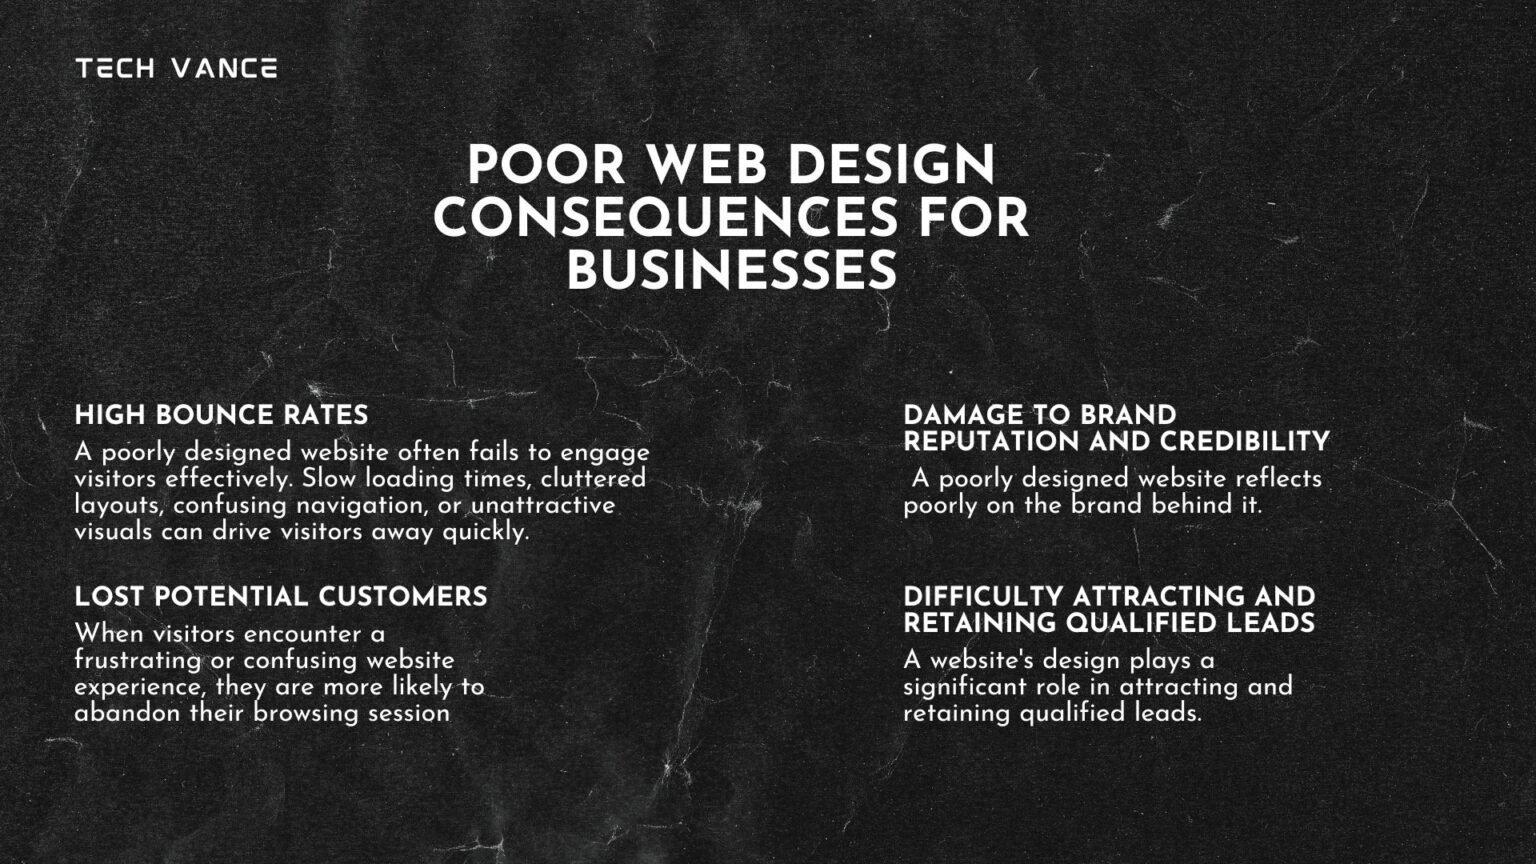 Poor web design consequences for businesses